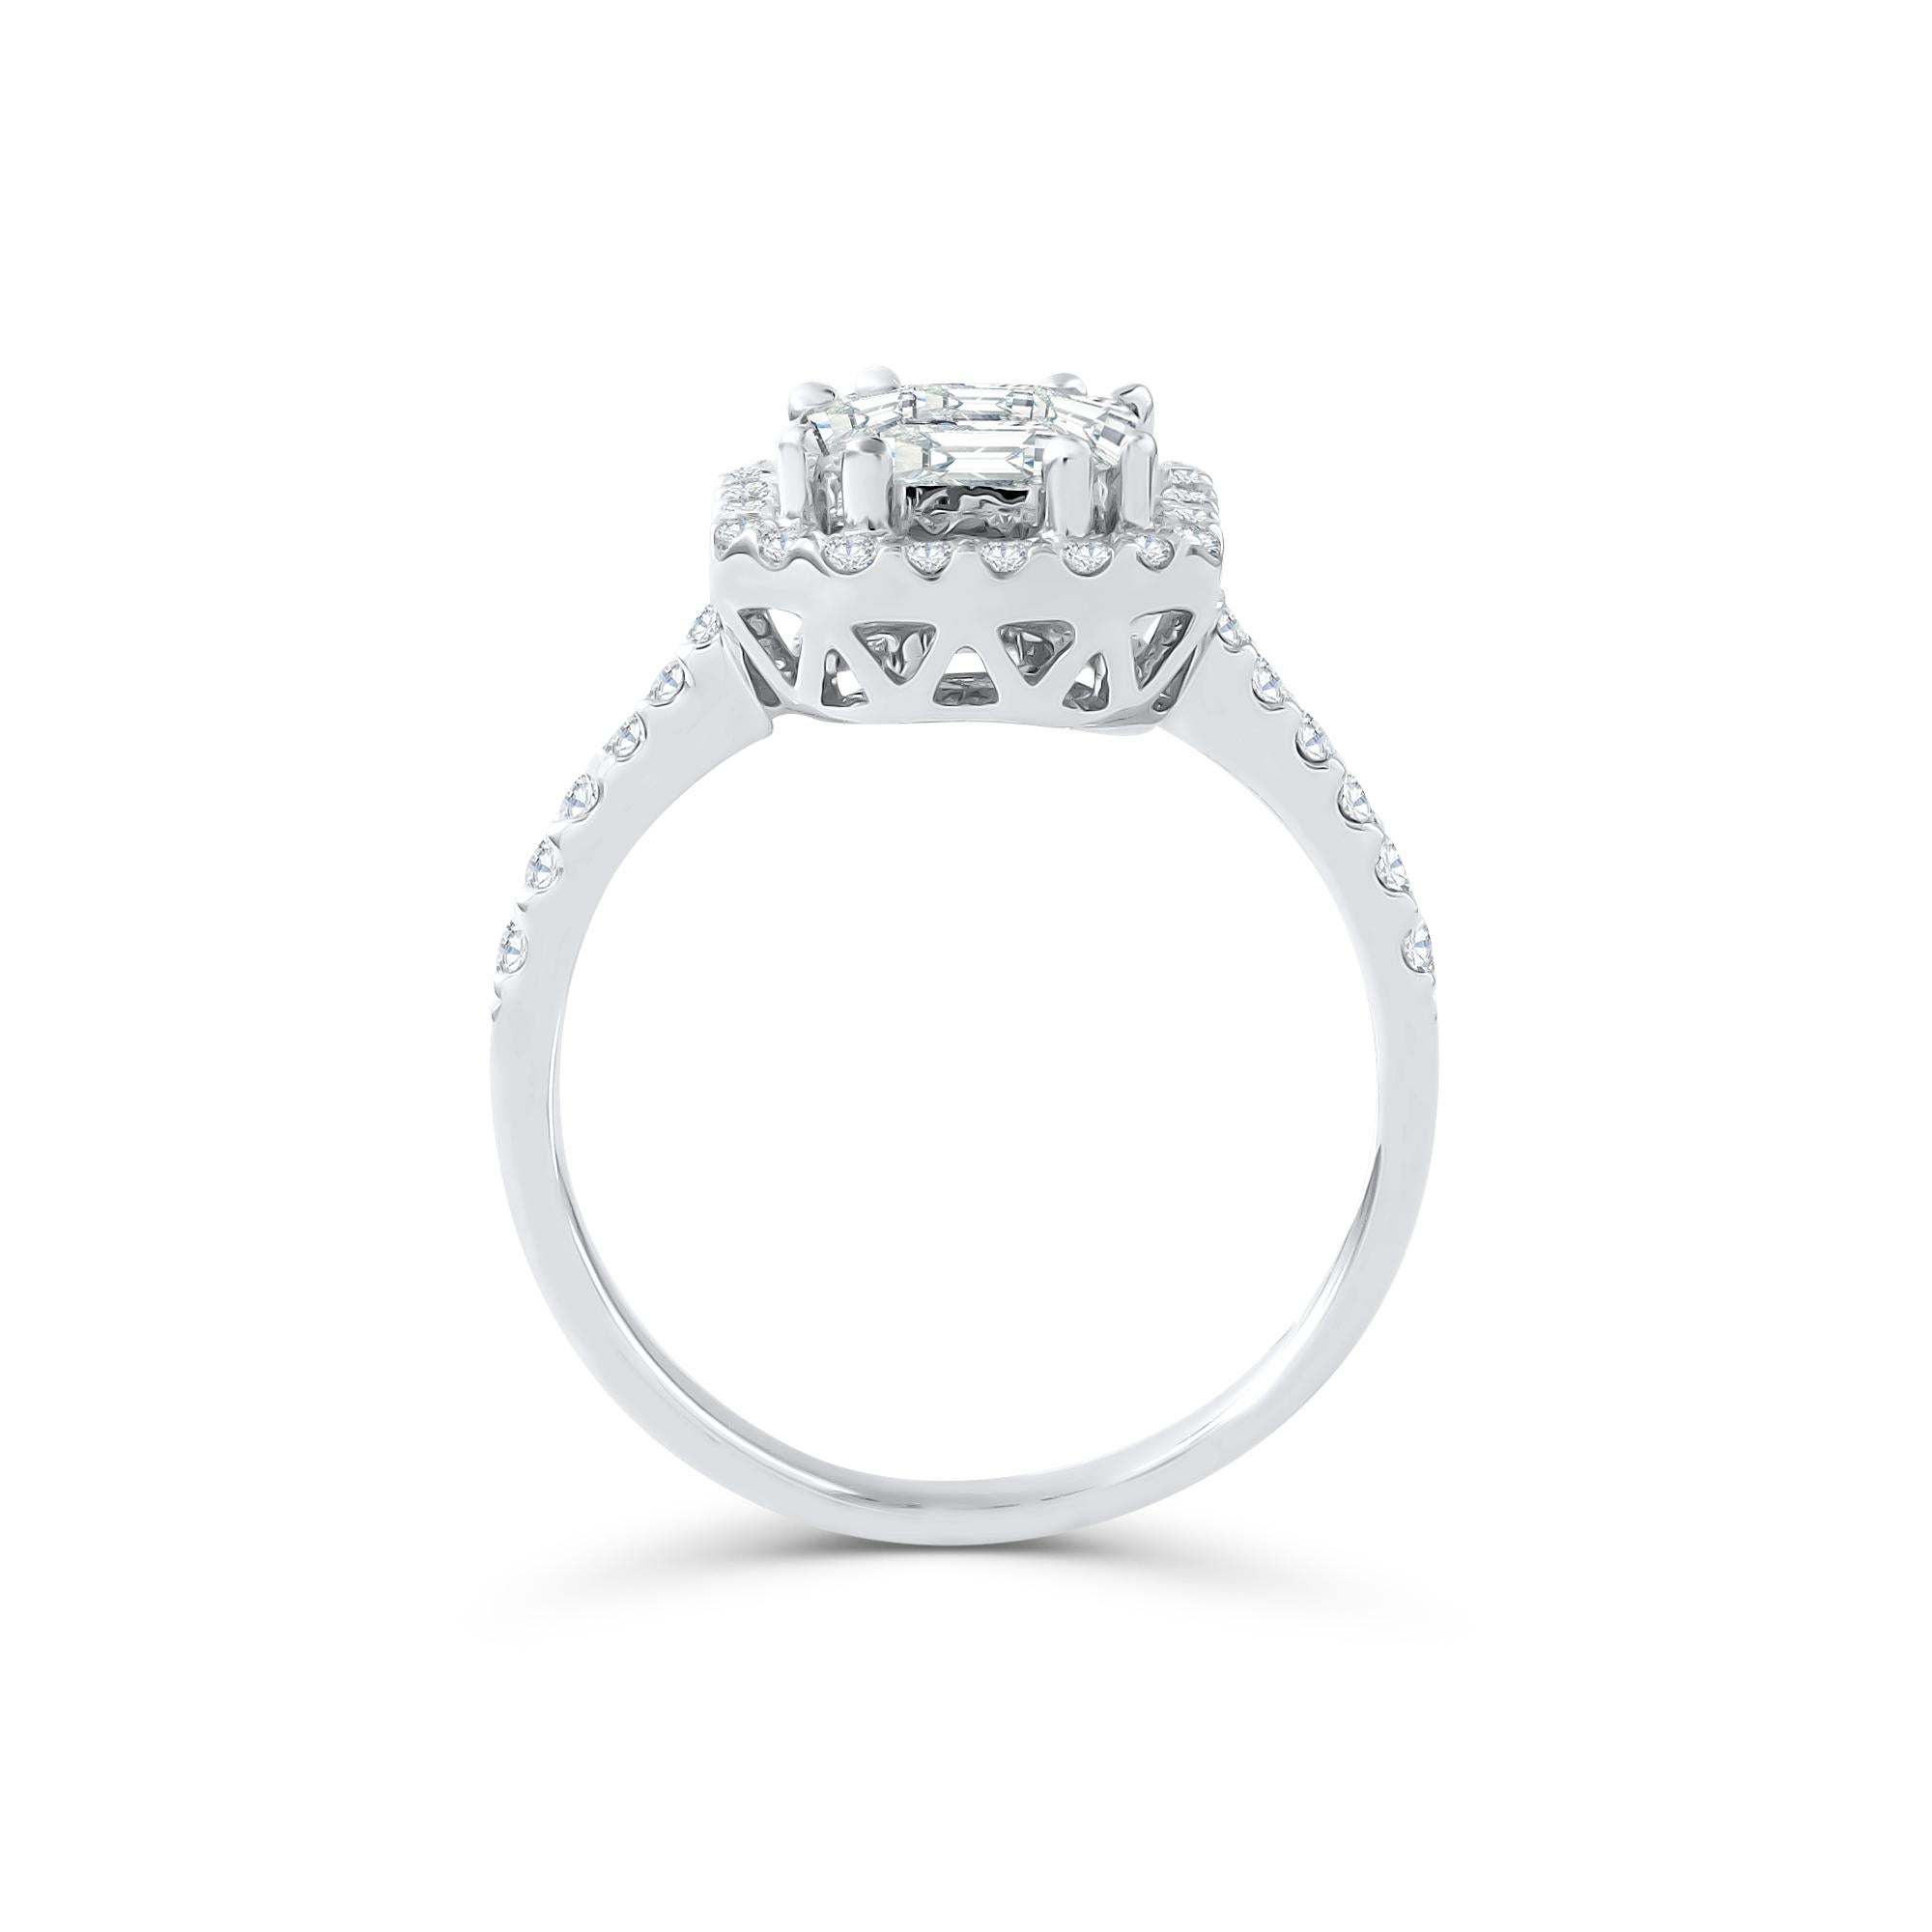 This diamond ring has a Emerald shape Illusion (Pie Cut) to create the look of a 2.75 carat single Emerald cut stone surrounded beautifully with brilliant round diamonds, Handcrafted in 18 kt white gold. This Ring will add a touch of sophistication